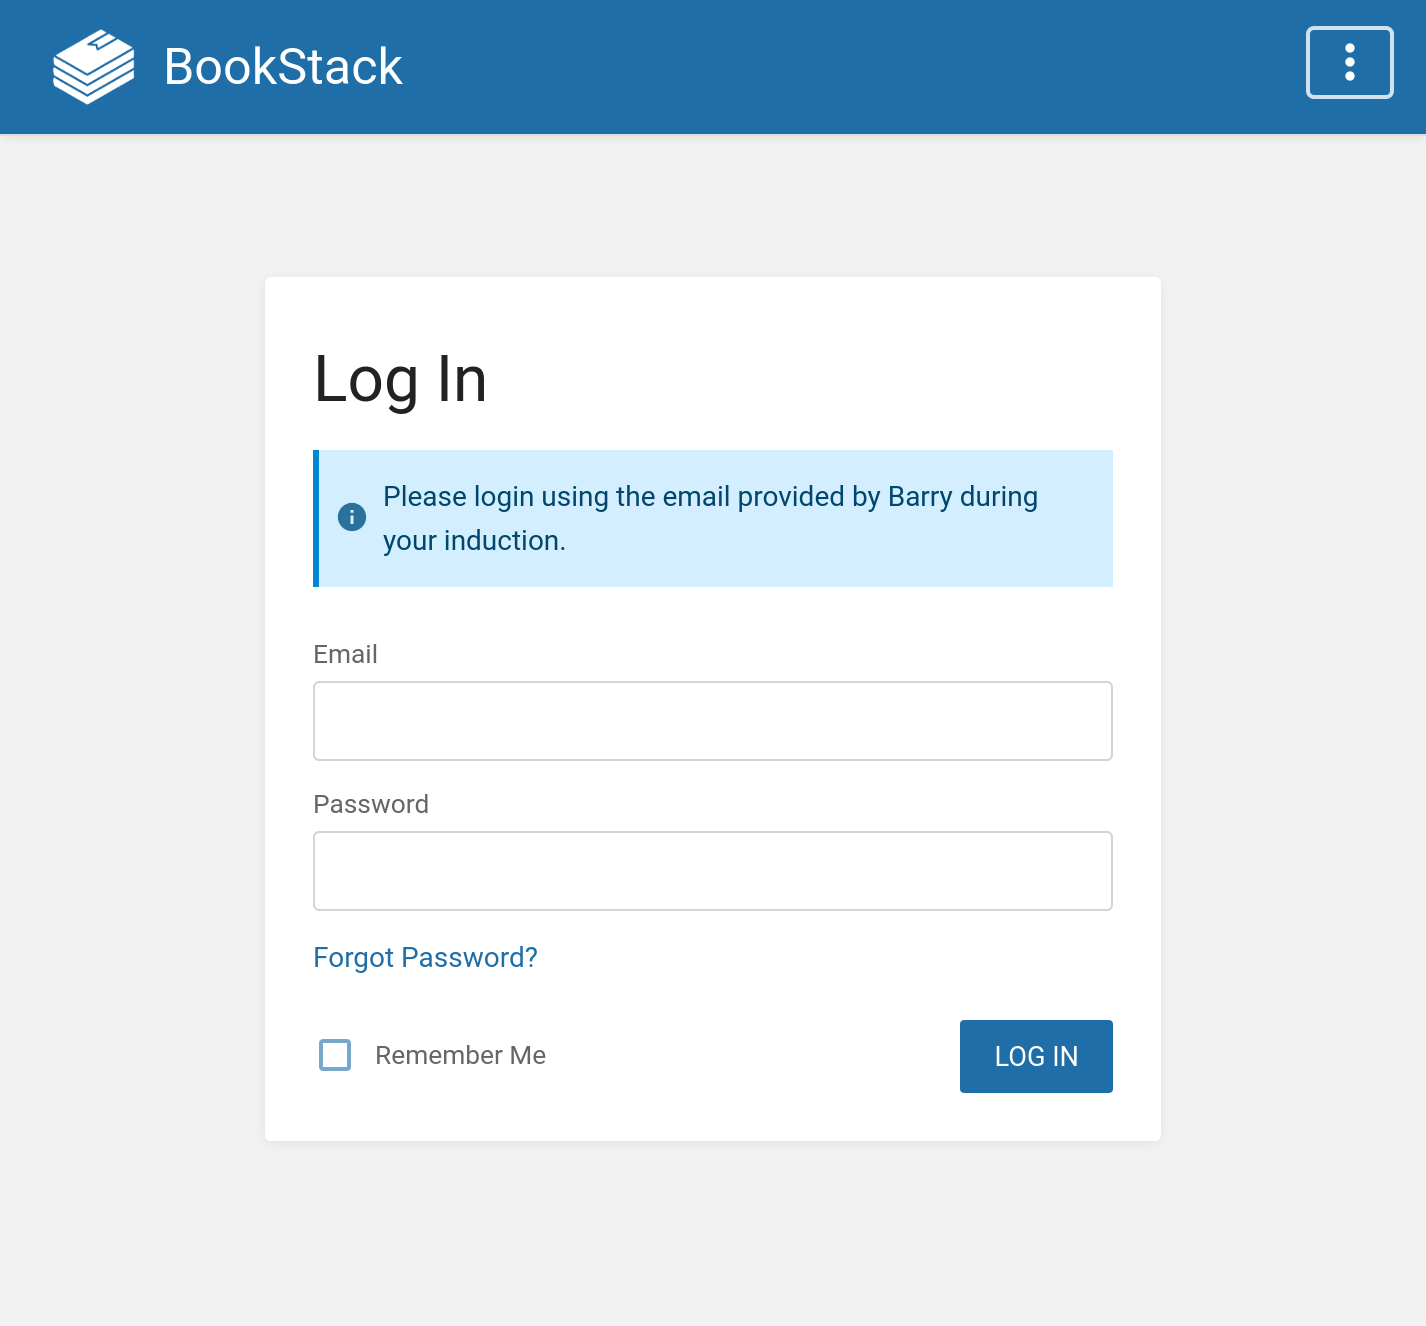 BookStack login view with a blue information box informing to use &ldquo;the email provided by Barry during your induction&rdquo;